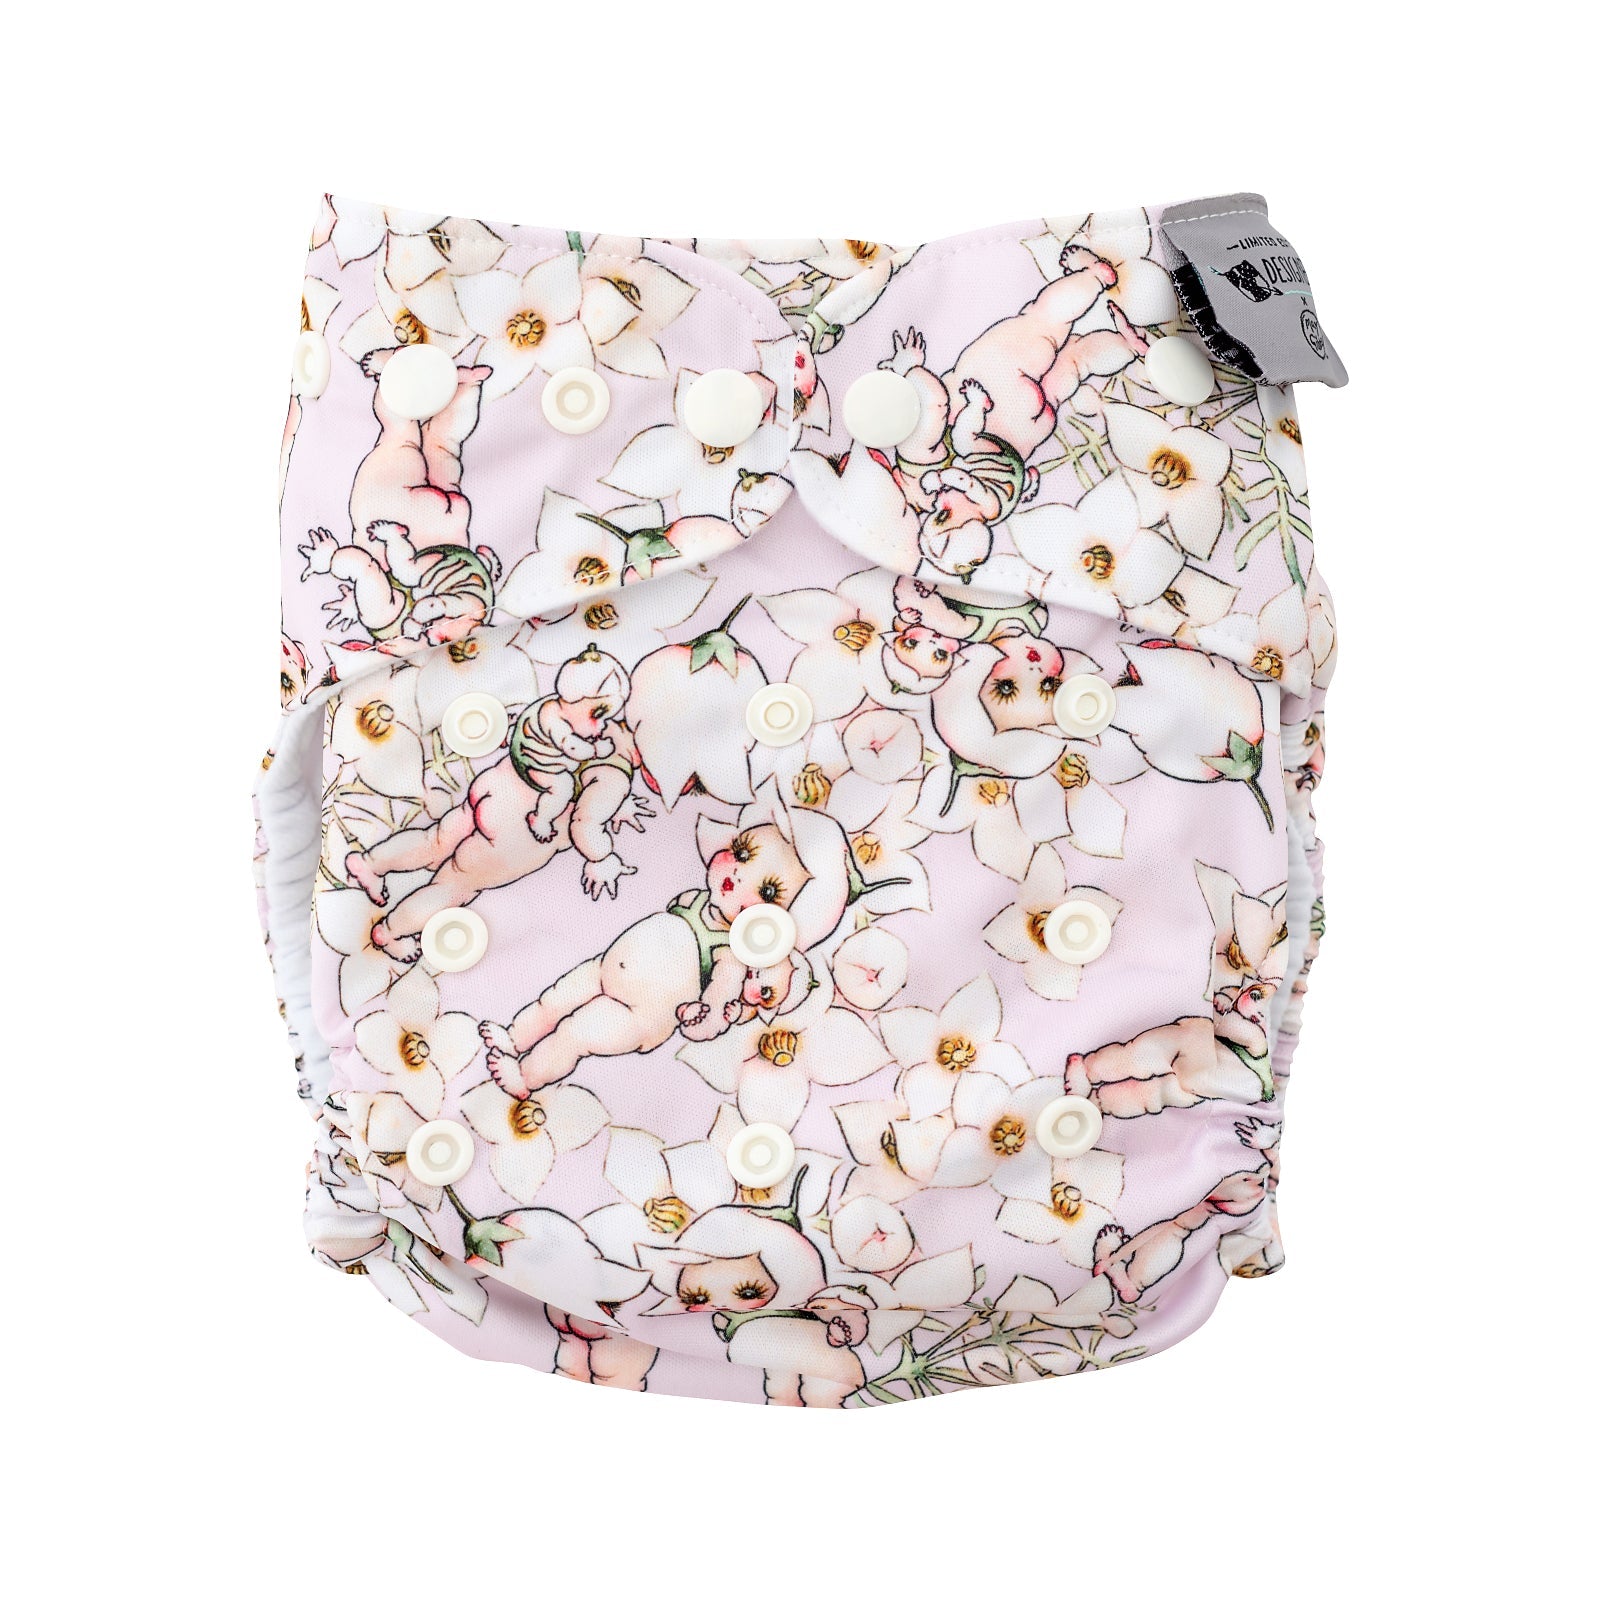 Flower Fairies Large Cloth Nappy